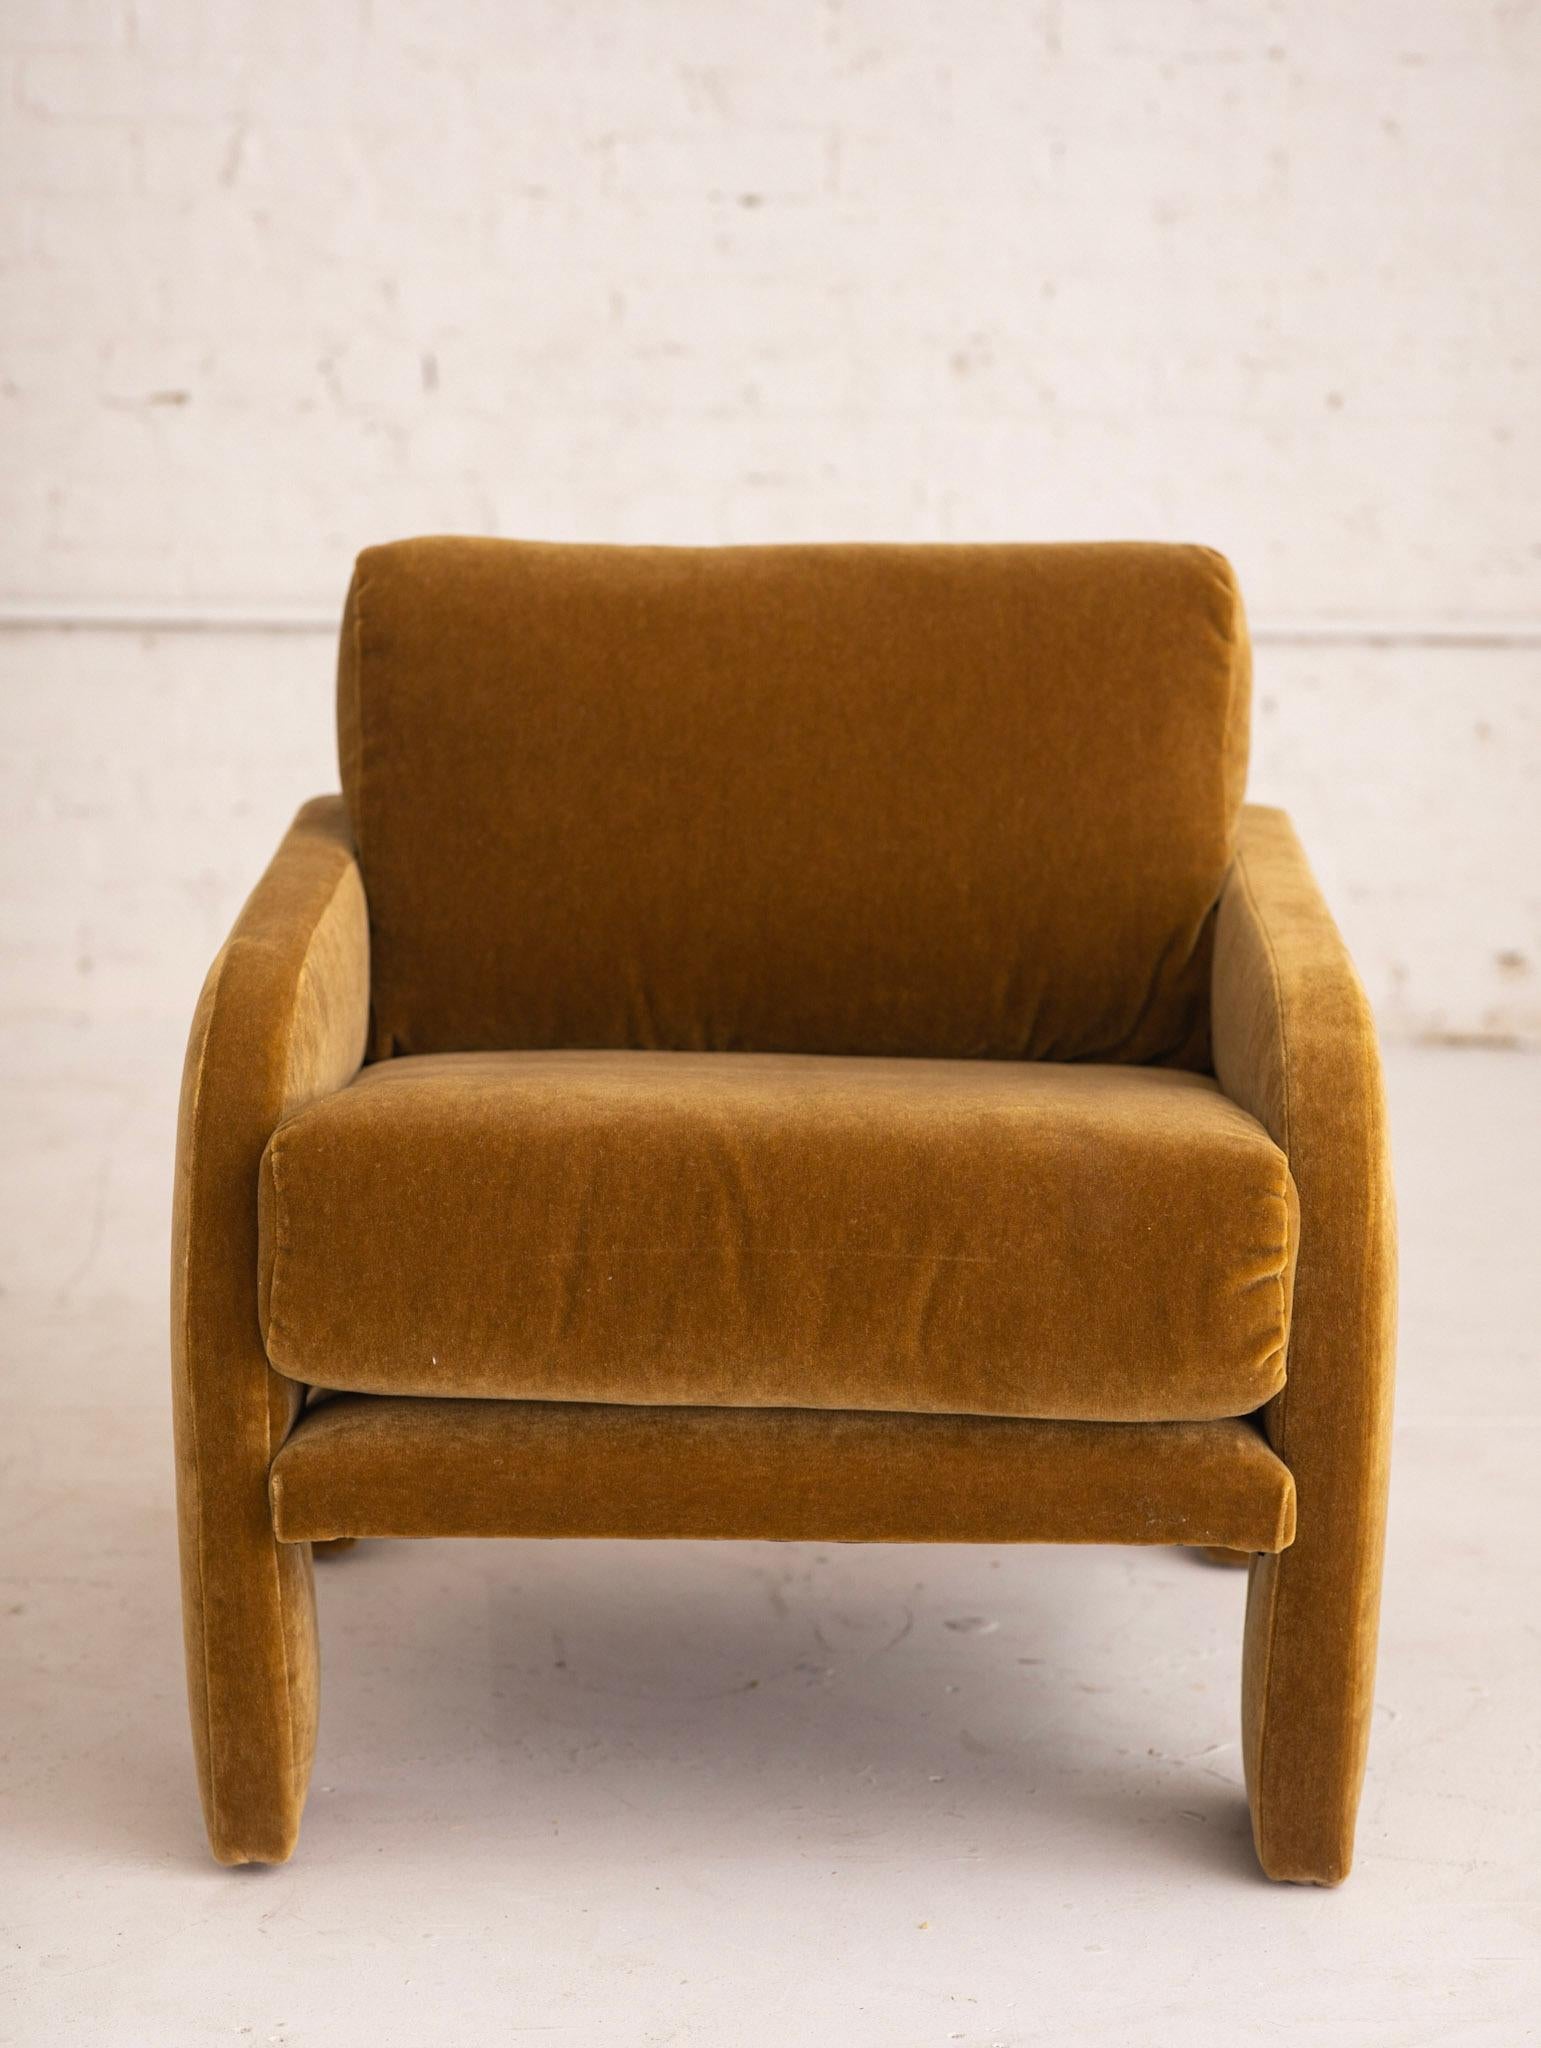 1980s Postmodern Architectural Armchair in Camel Mohair 3